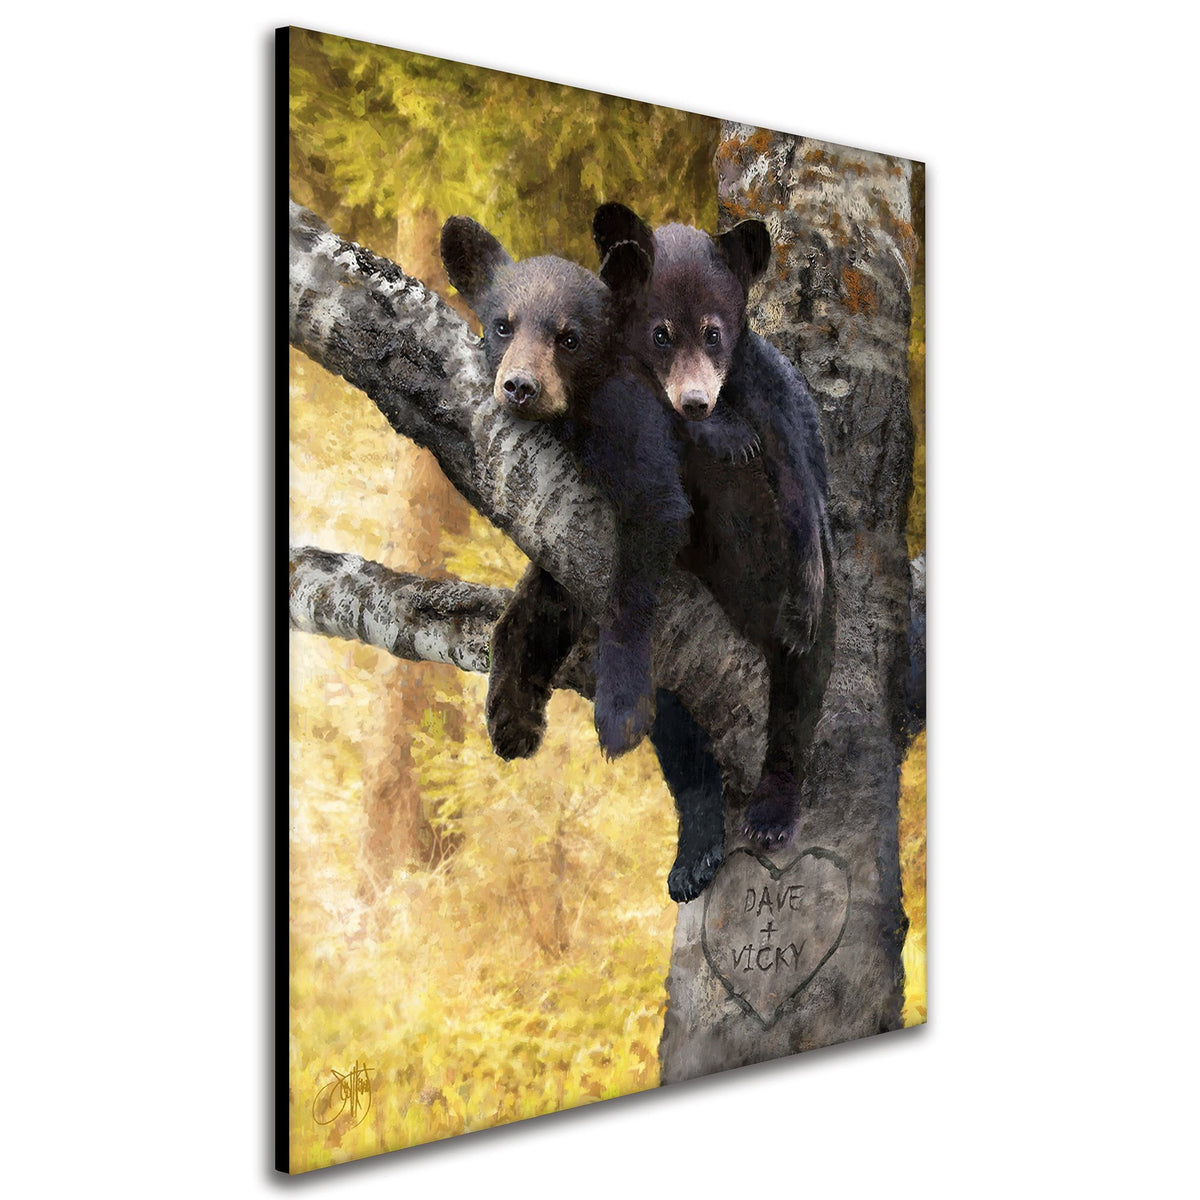 Log Cabin decor of a bear couple in tree personalized with names- Angled View